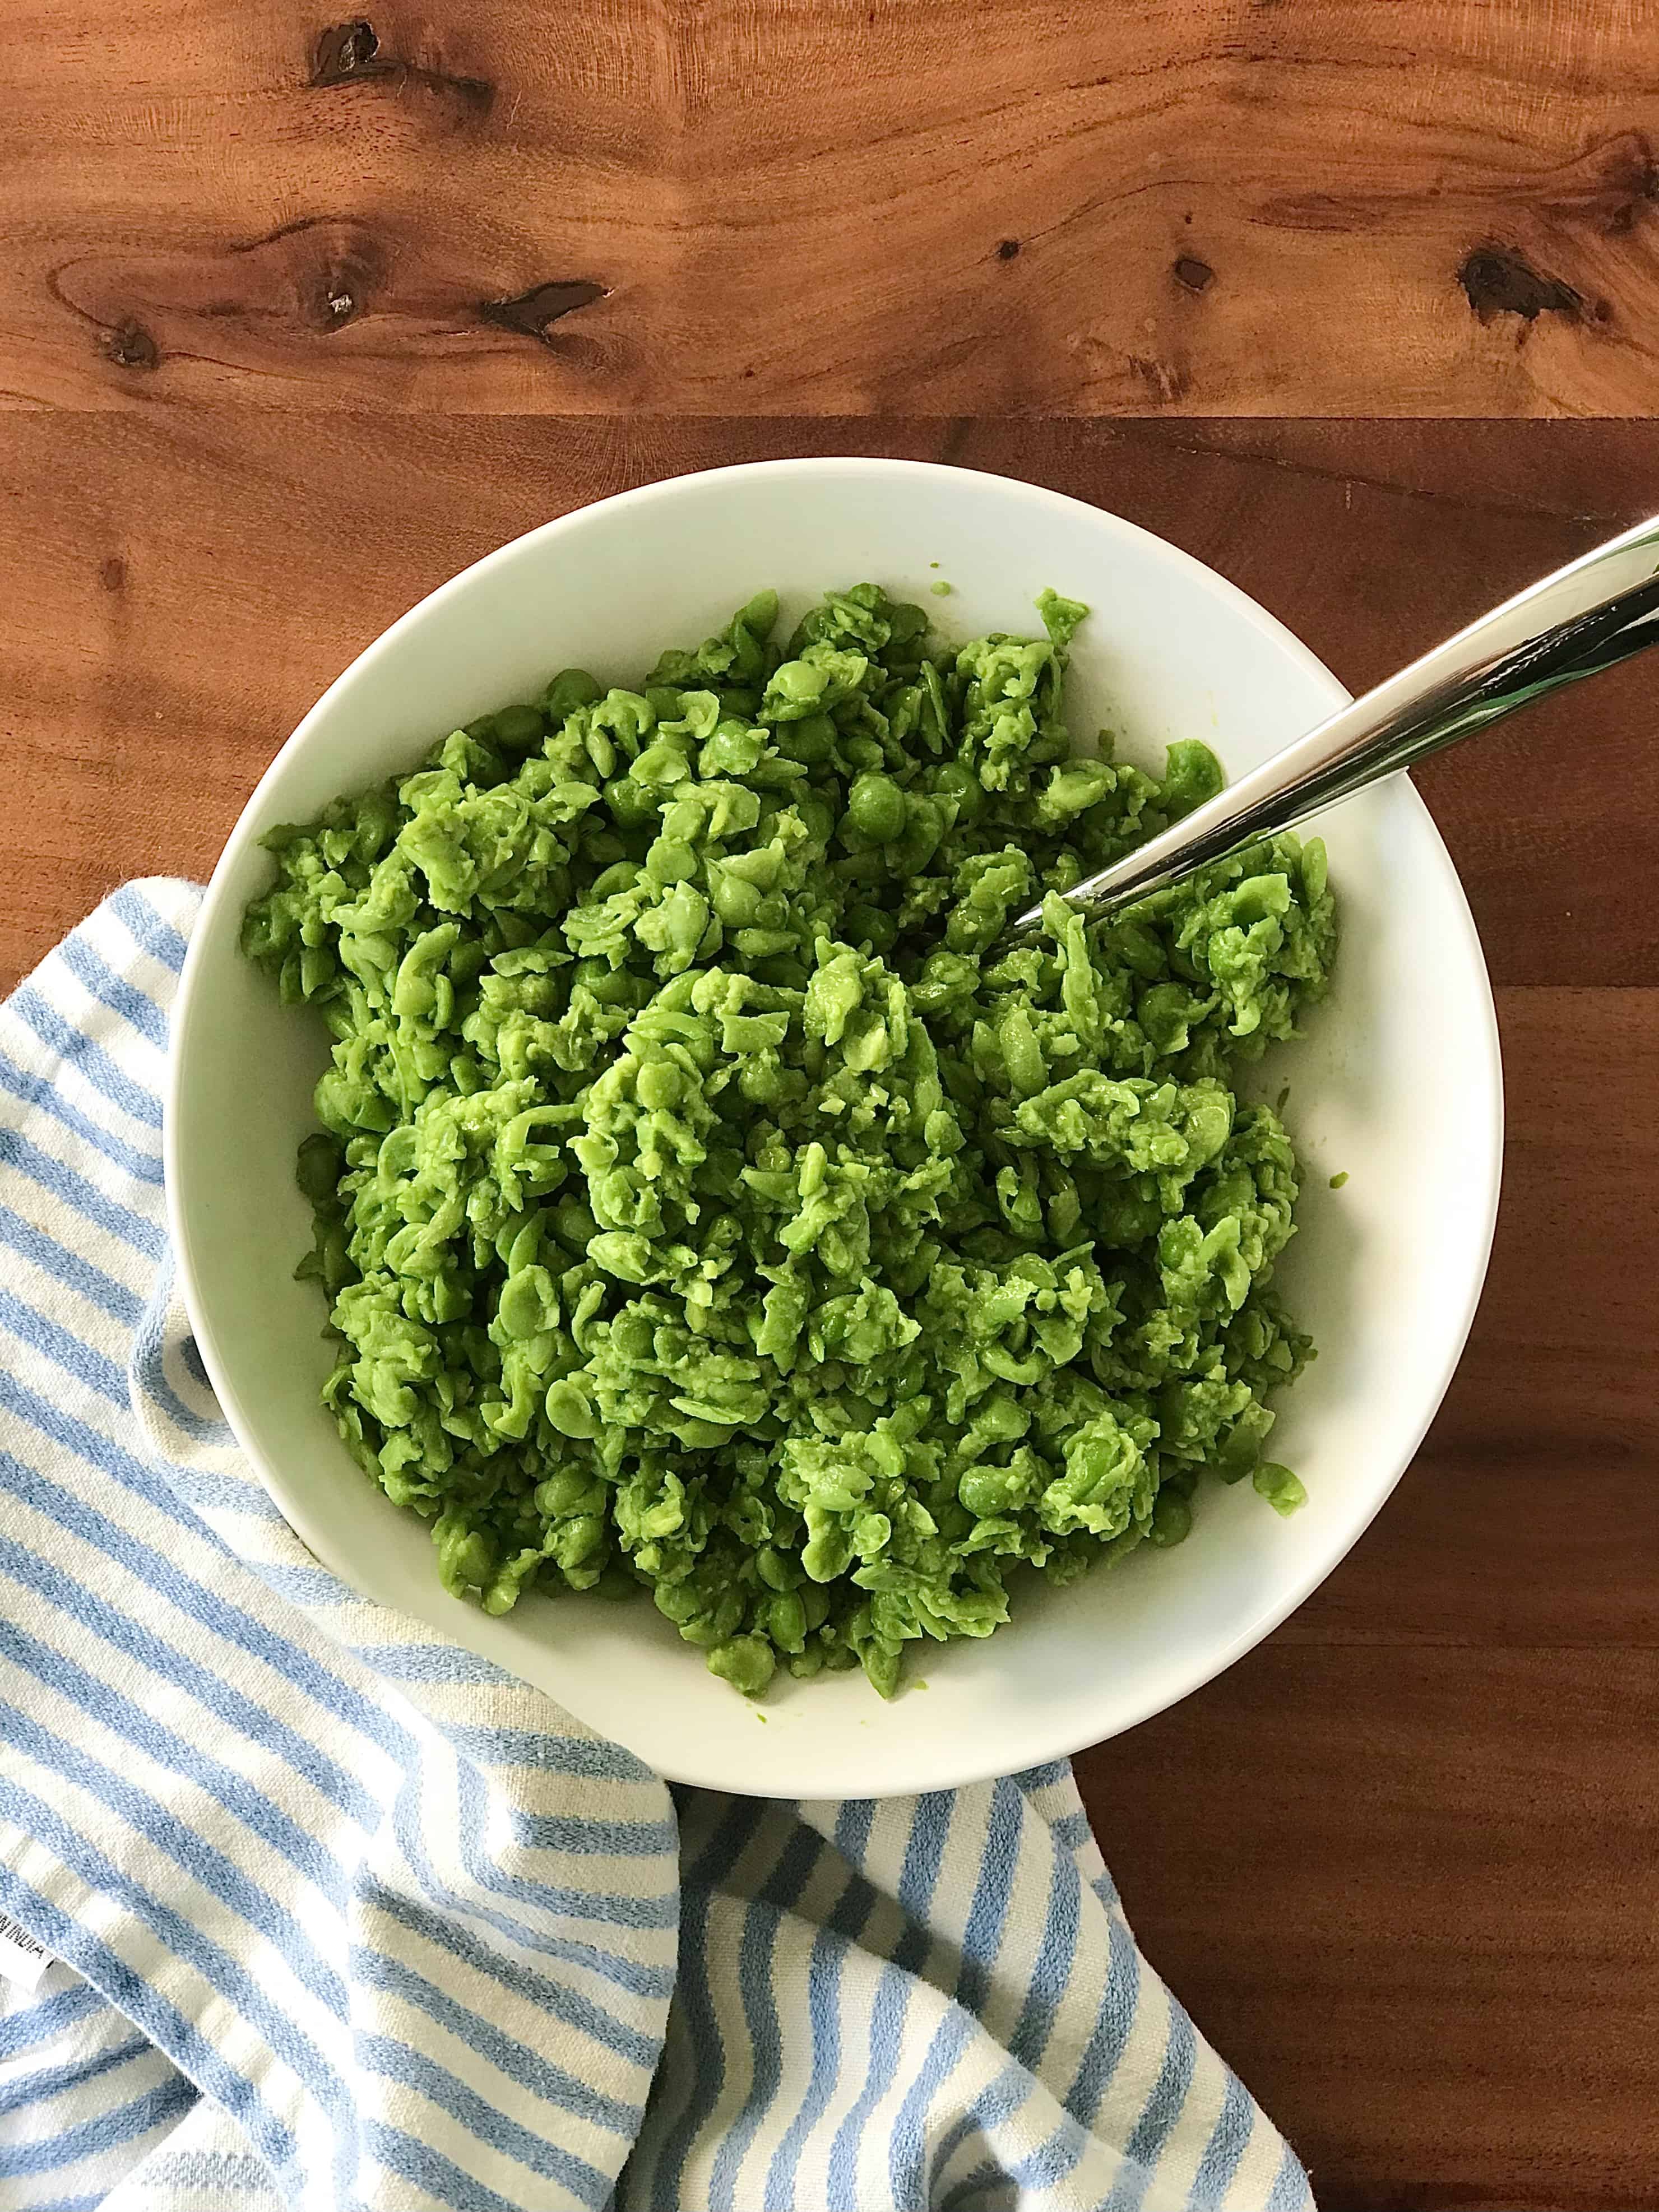 mushy peas in a white bowl on a wooden table next to a blue striped towel